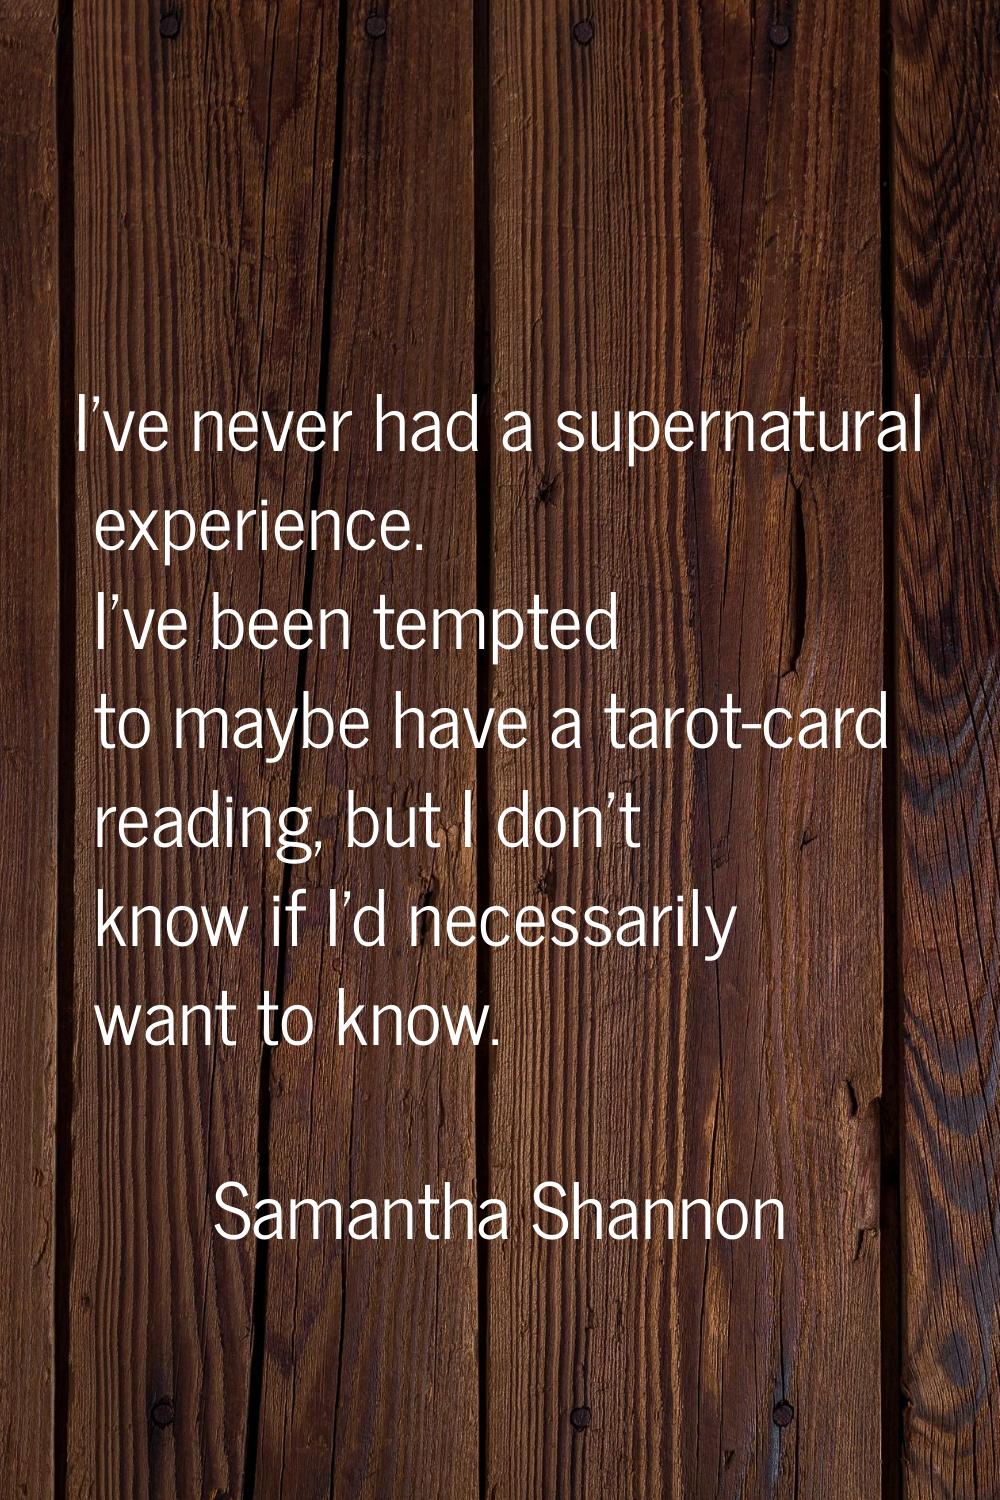 I've never had a supernatural experience. I've been tempted to maybe have a tarot-card reading, but